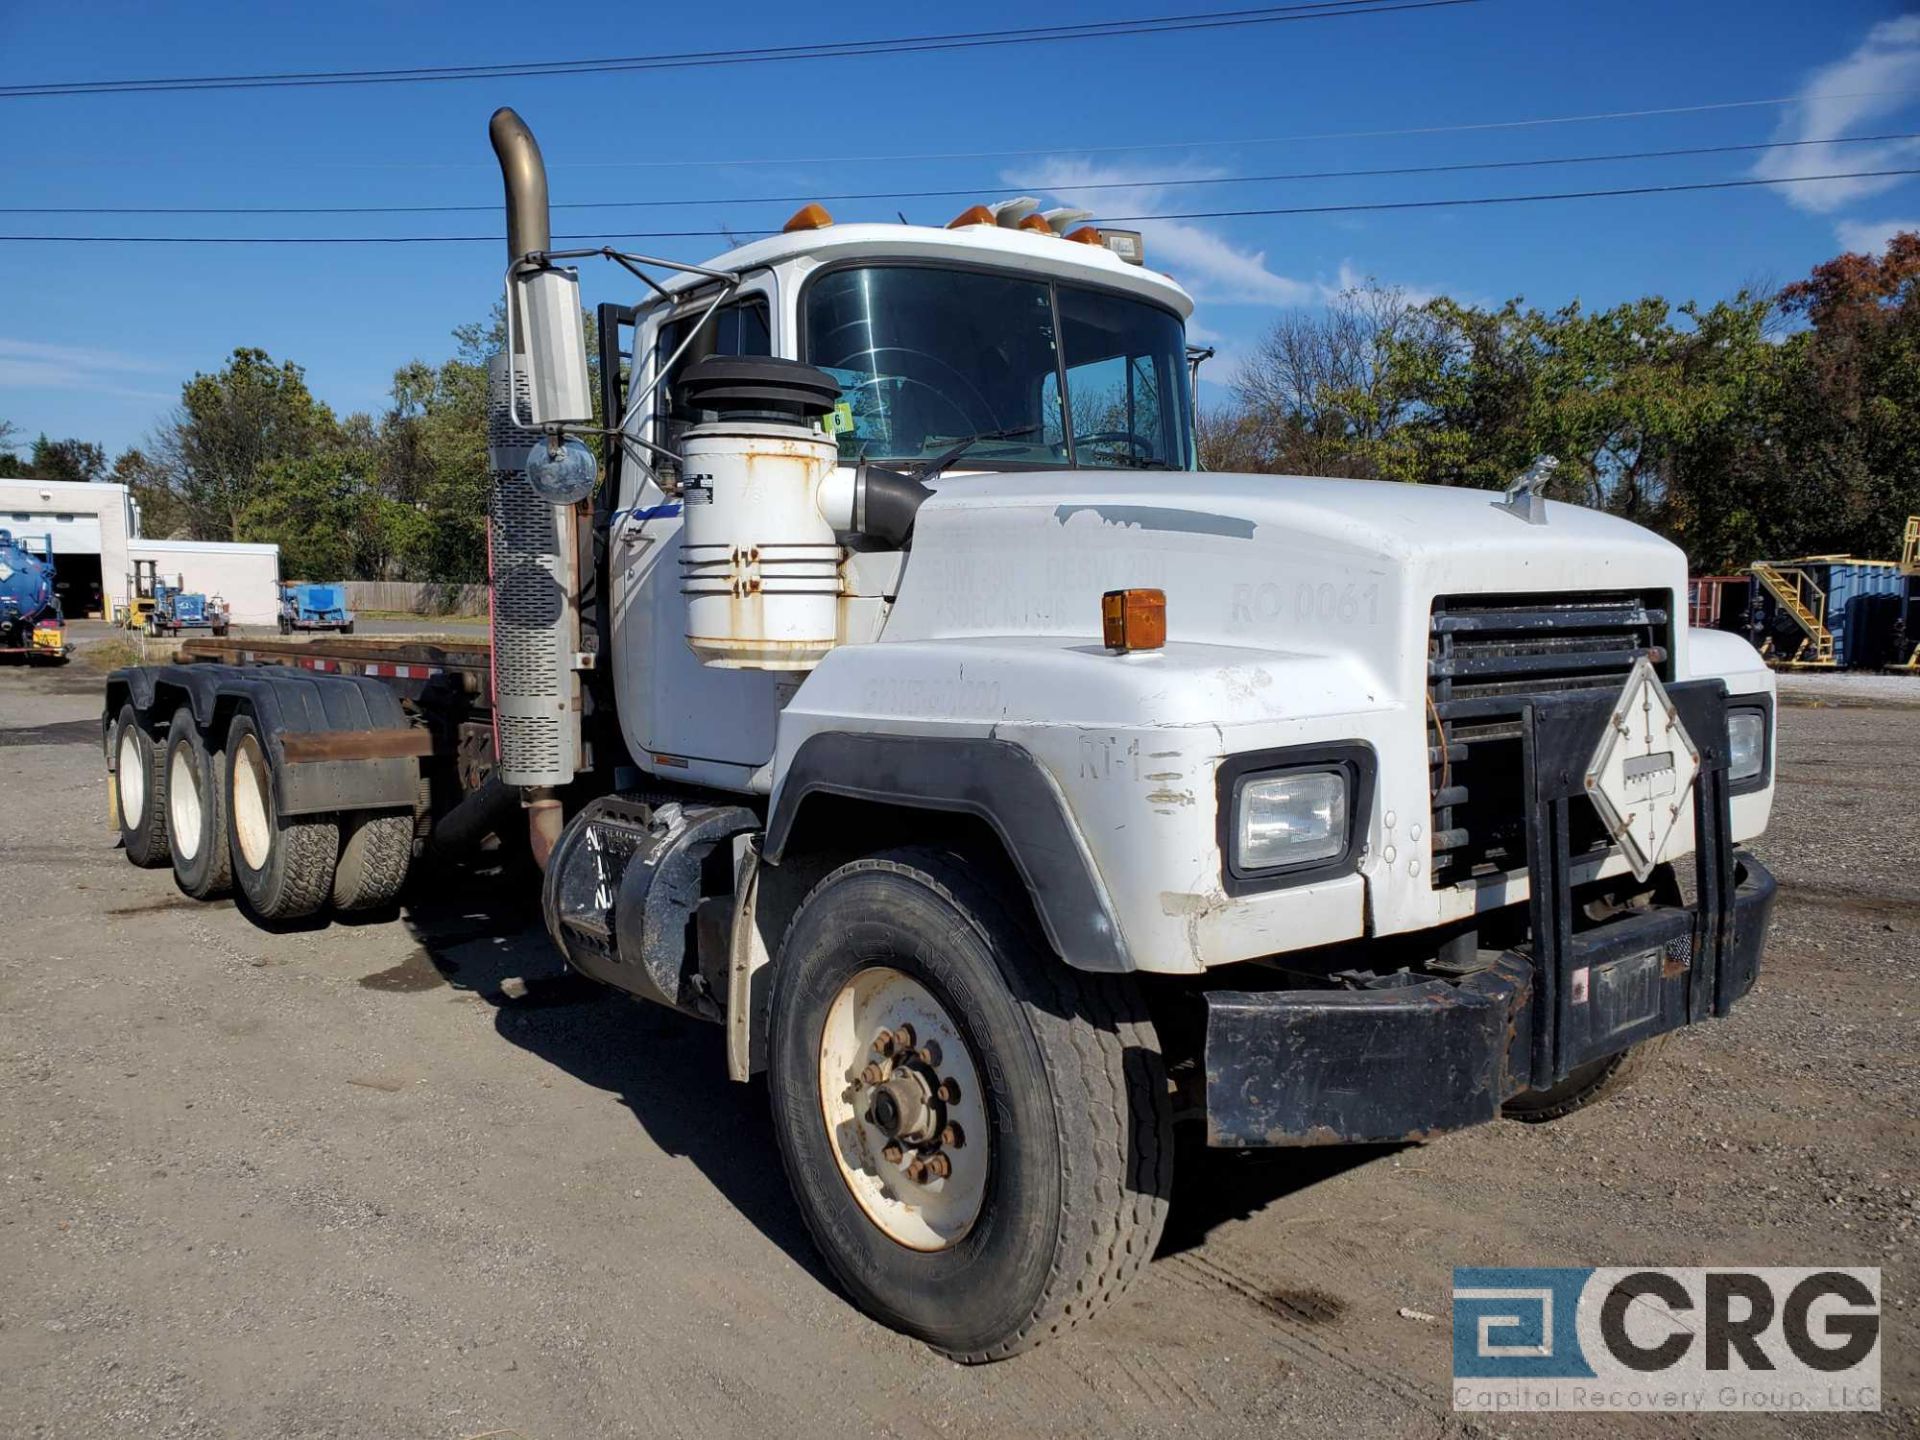 1995 Mack RD6905 tag axle Roll Off Truck, 80,000 GVWR, 25,674 hours, 20-30 cu. Yard capacity, with - Image 2 of 13